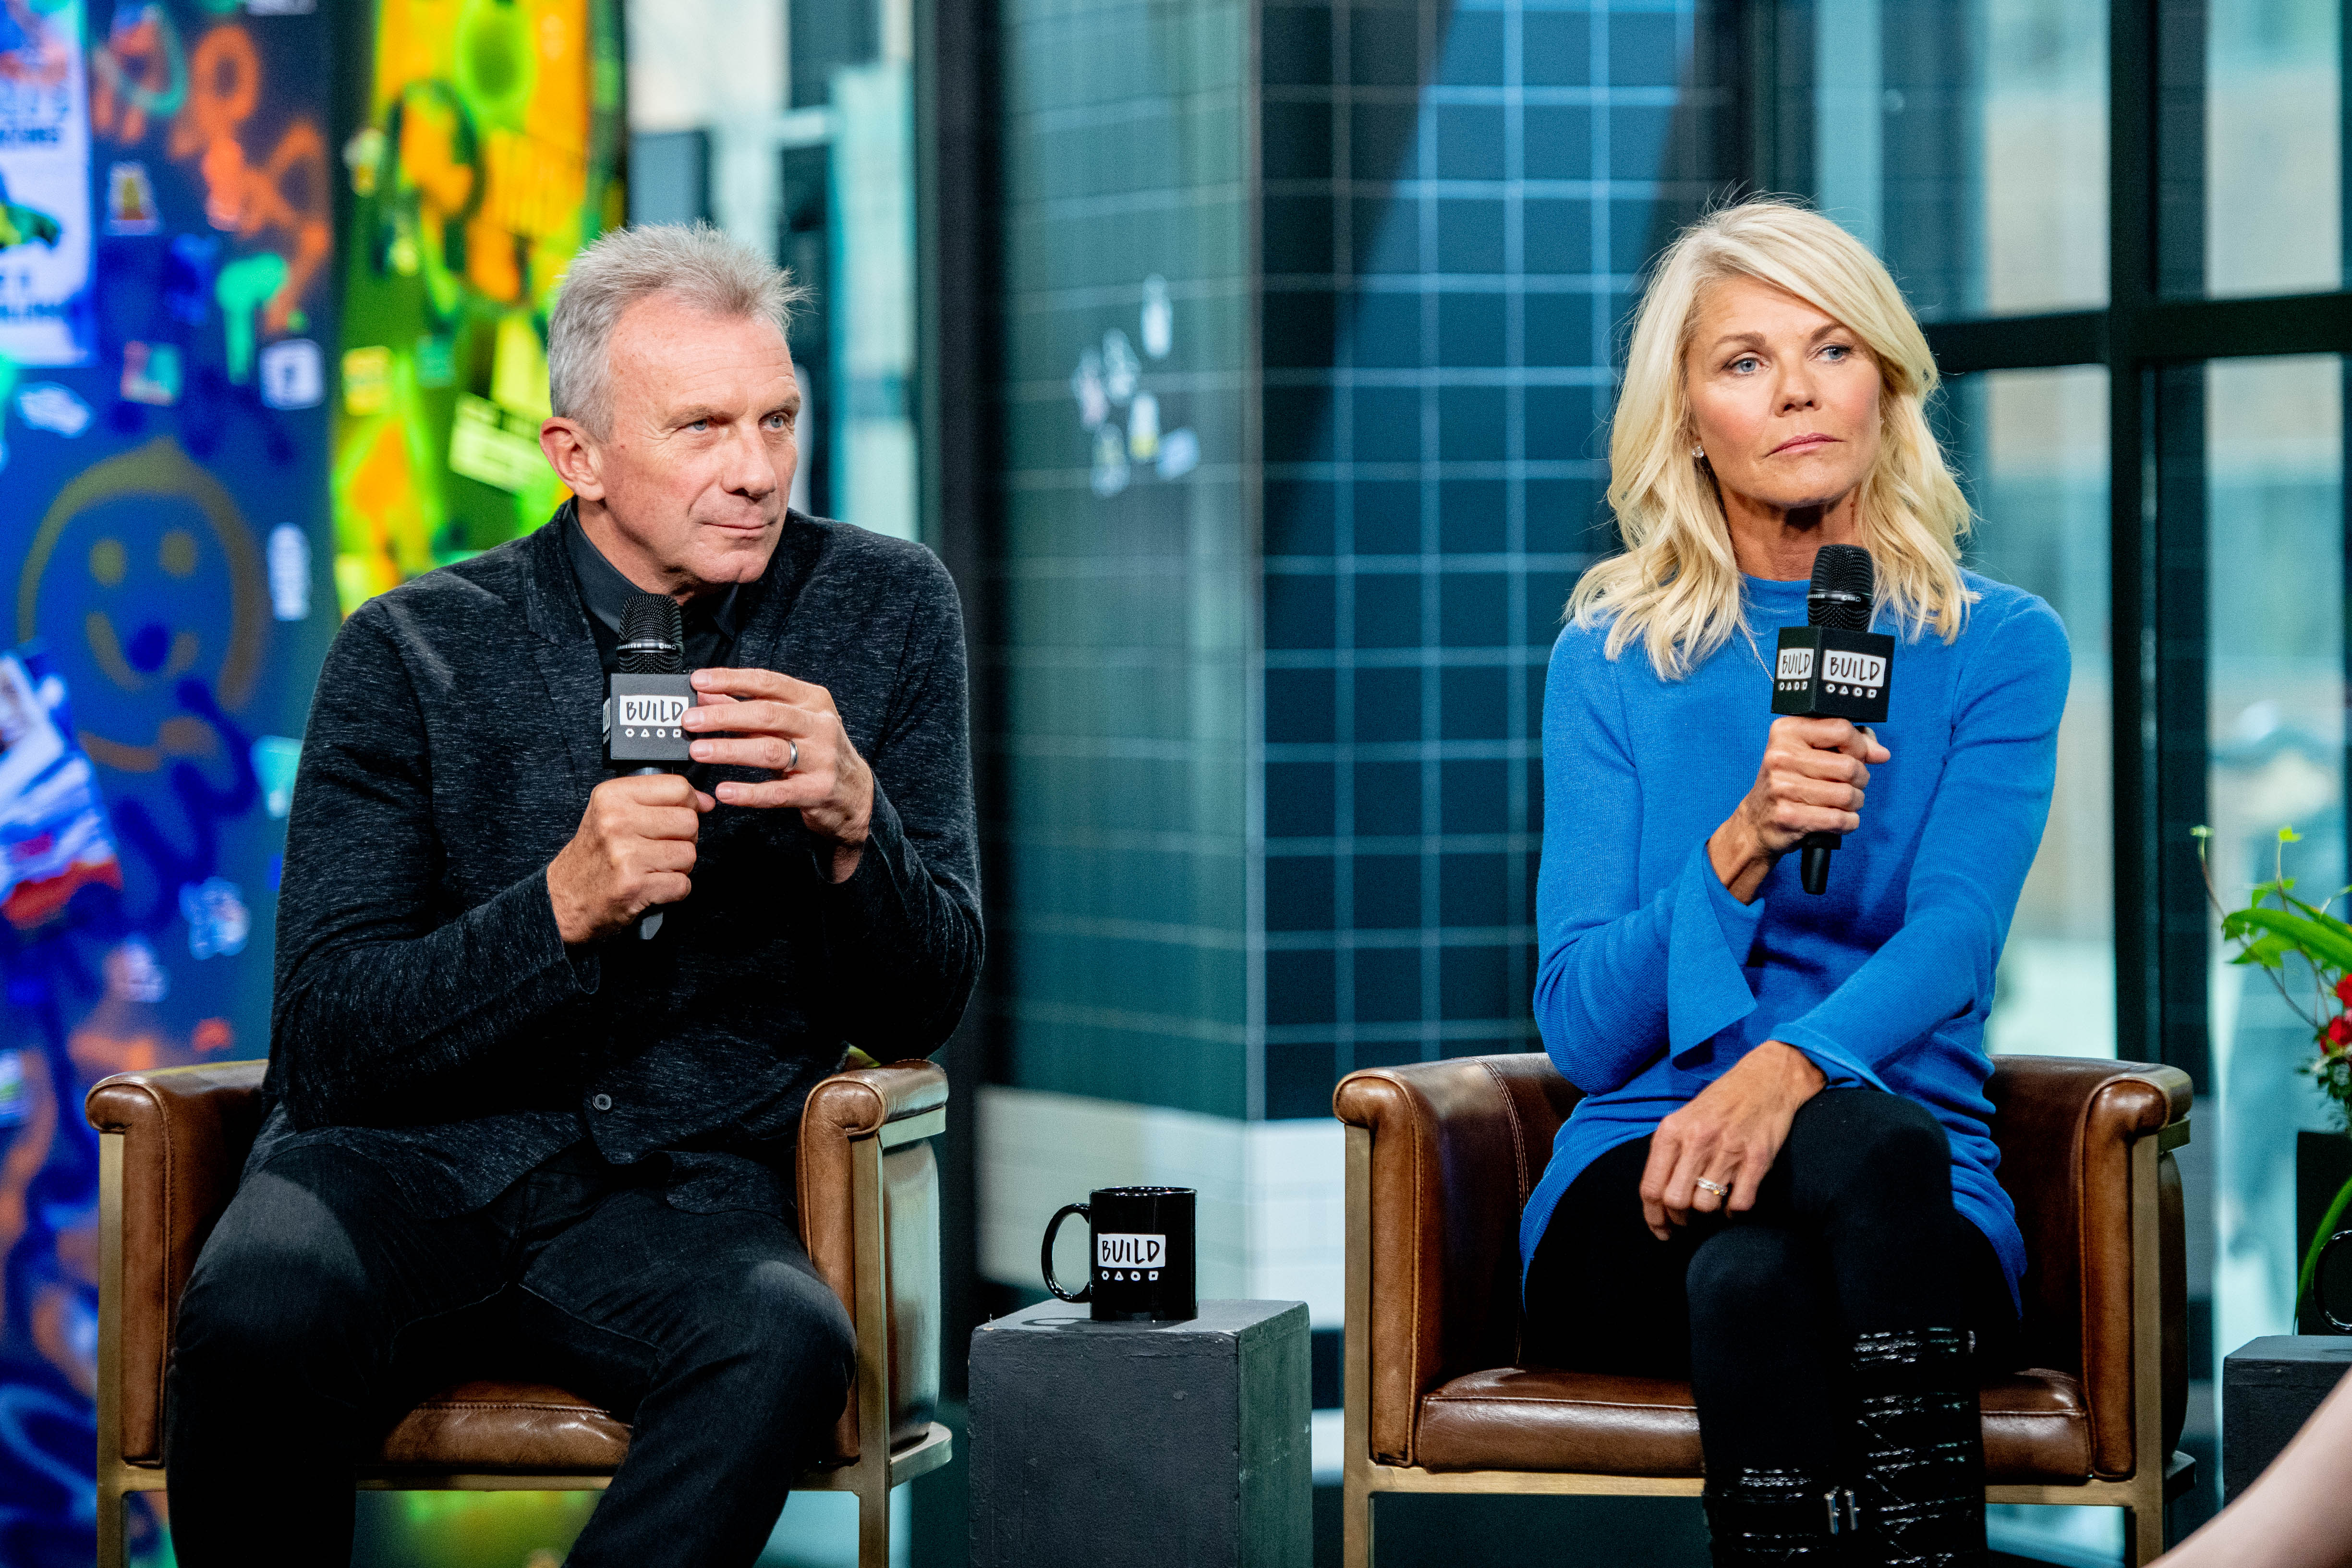 Joe and Jennifer Montana discussing "Breakaway from Heart Disease" with the Build Series in New York City | Source: Getty Images